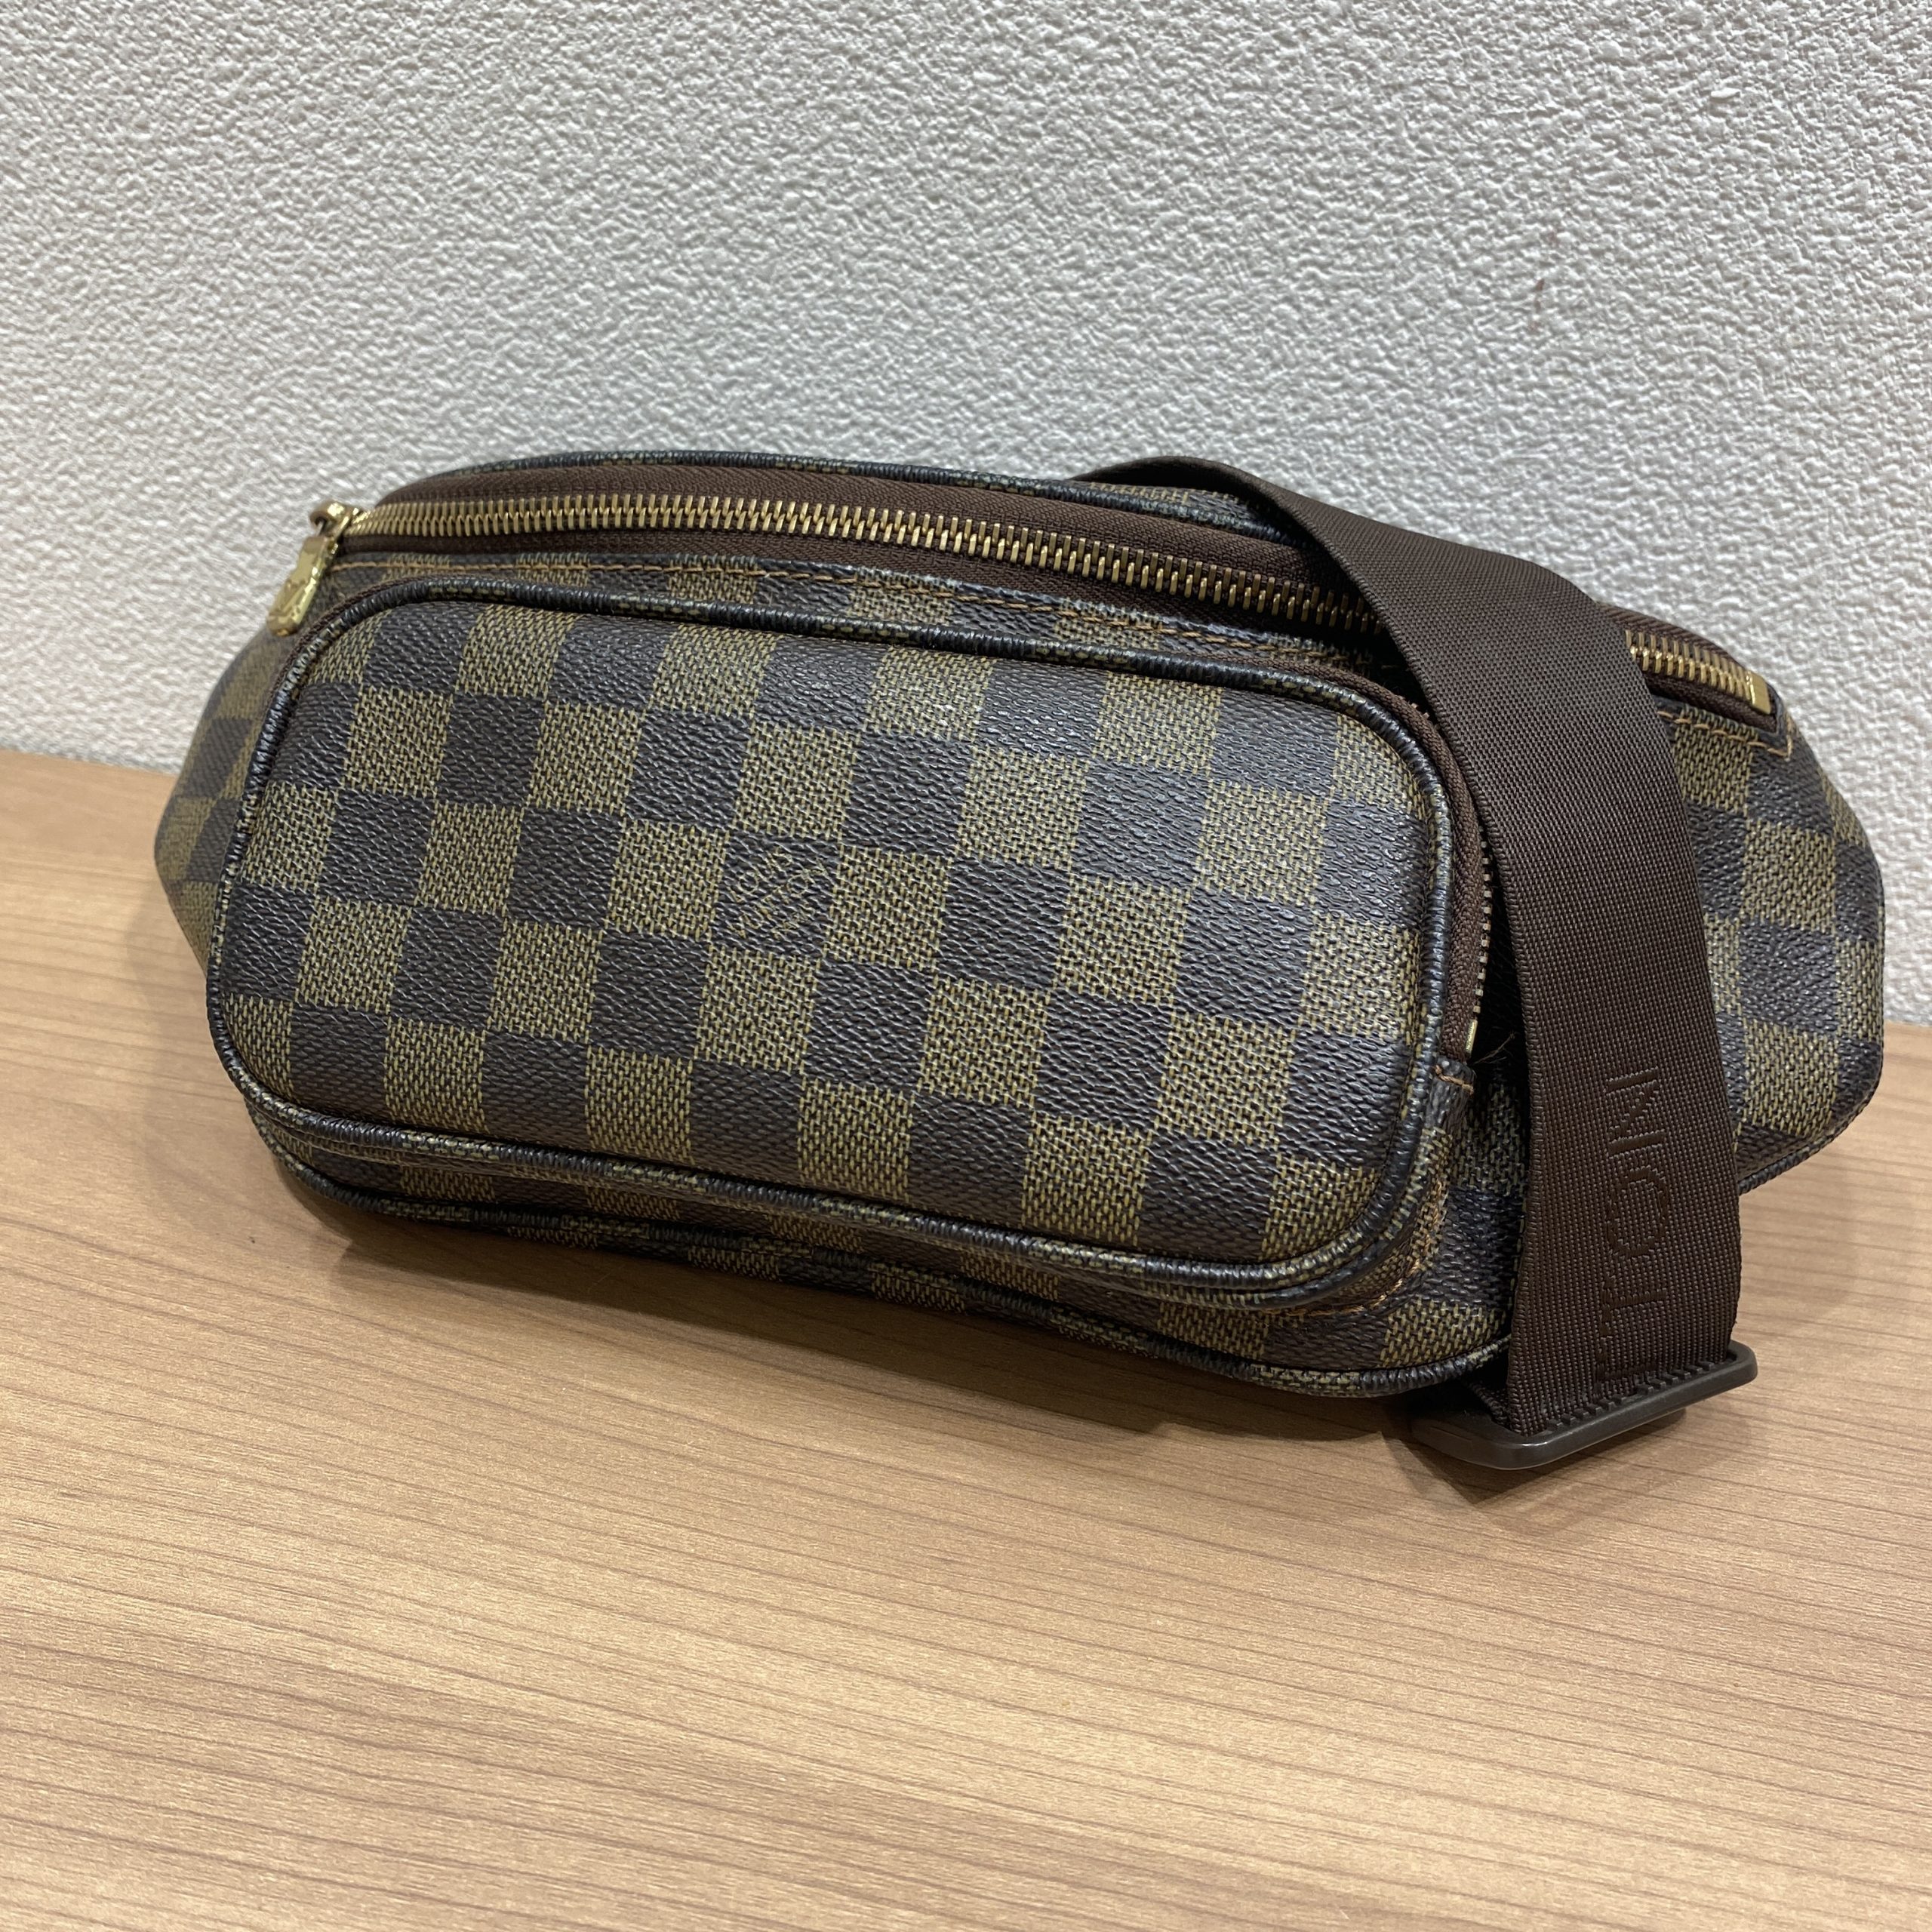 【LOUIS VUITTON/ルイヴィトン】ダミエ バムバッグ・メルヴィーユ N51172